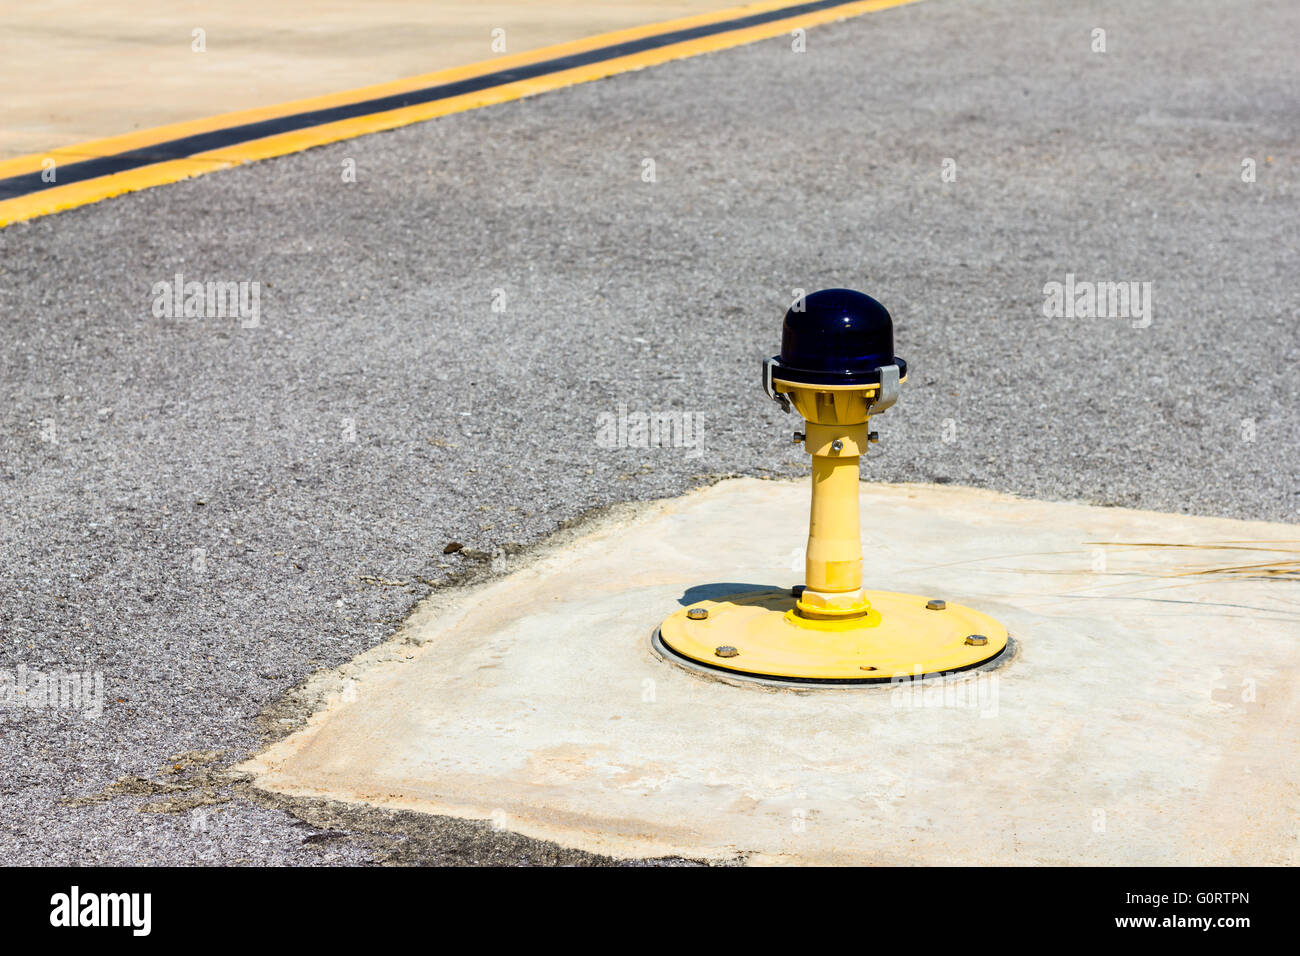 Ground side lamp taxiway at the airport Stock Photo